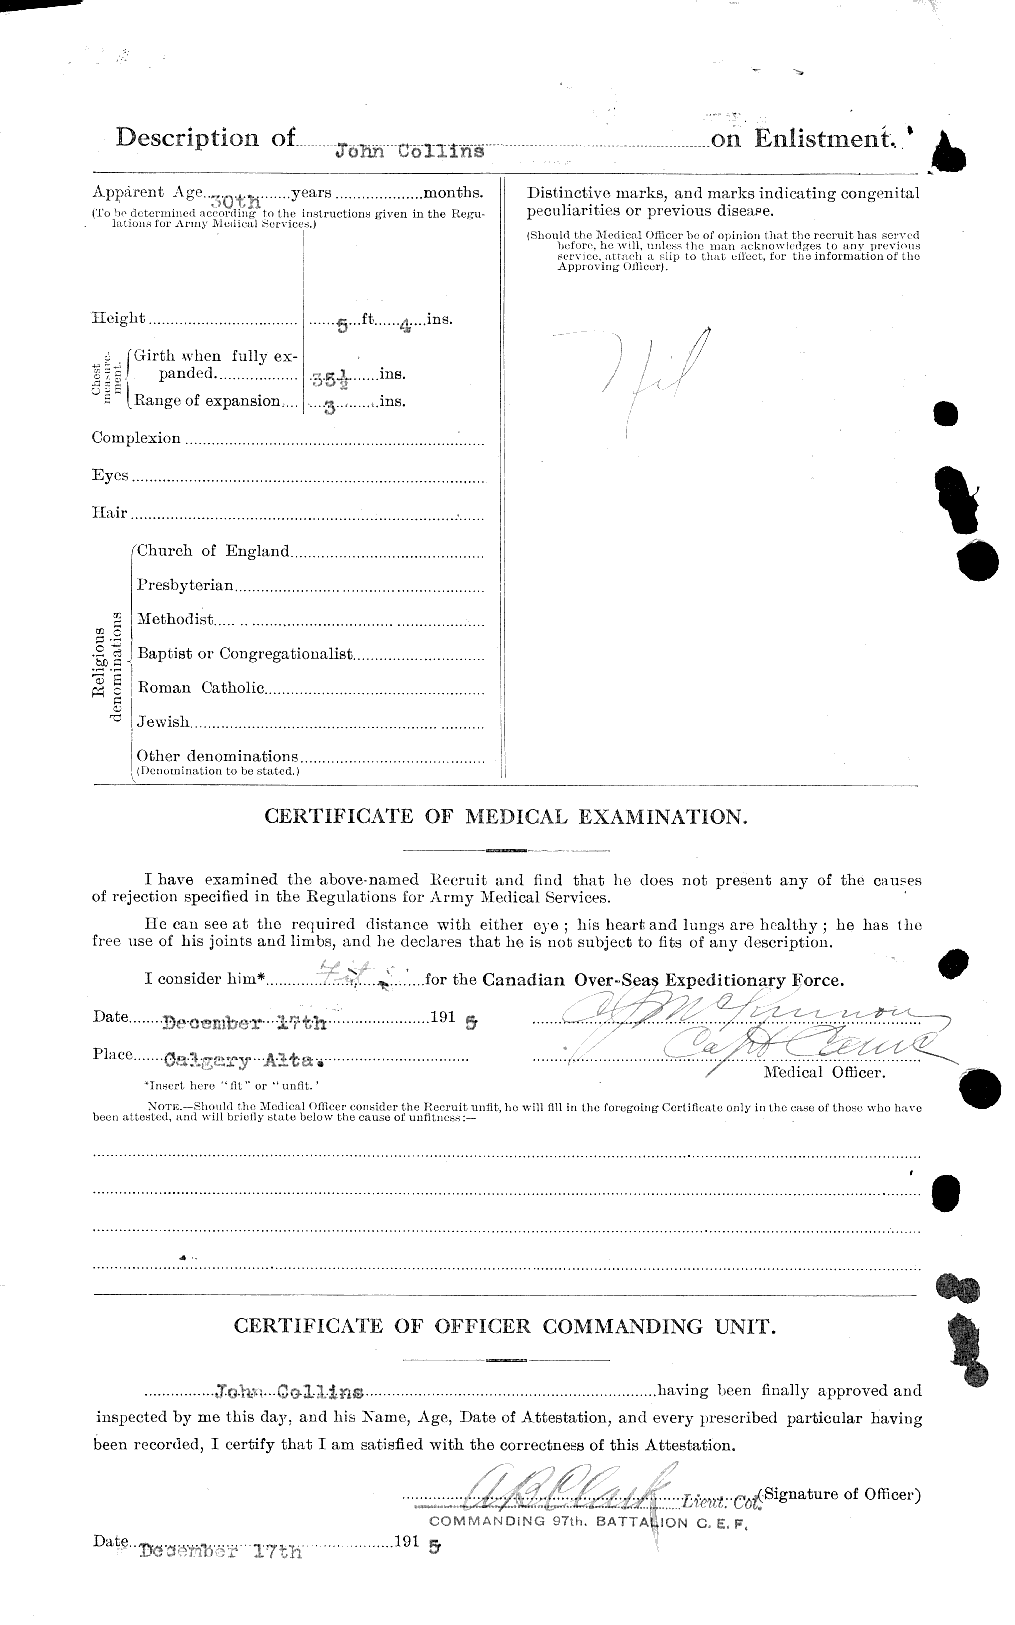 Personnel Records of the First World War - CEF 037975b